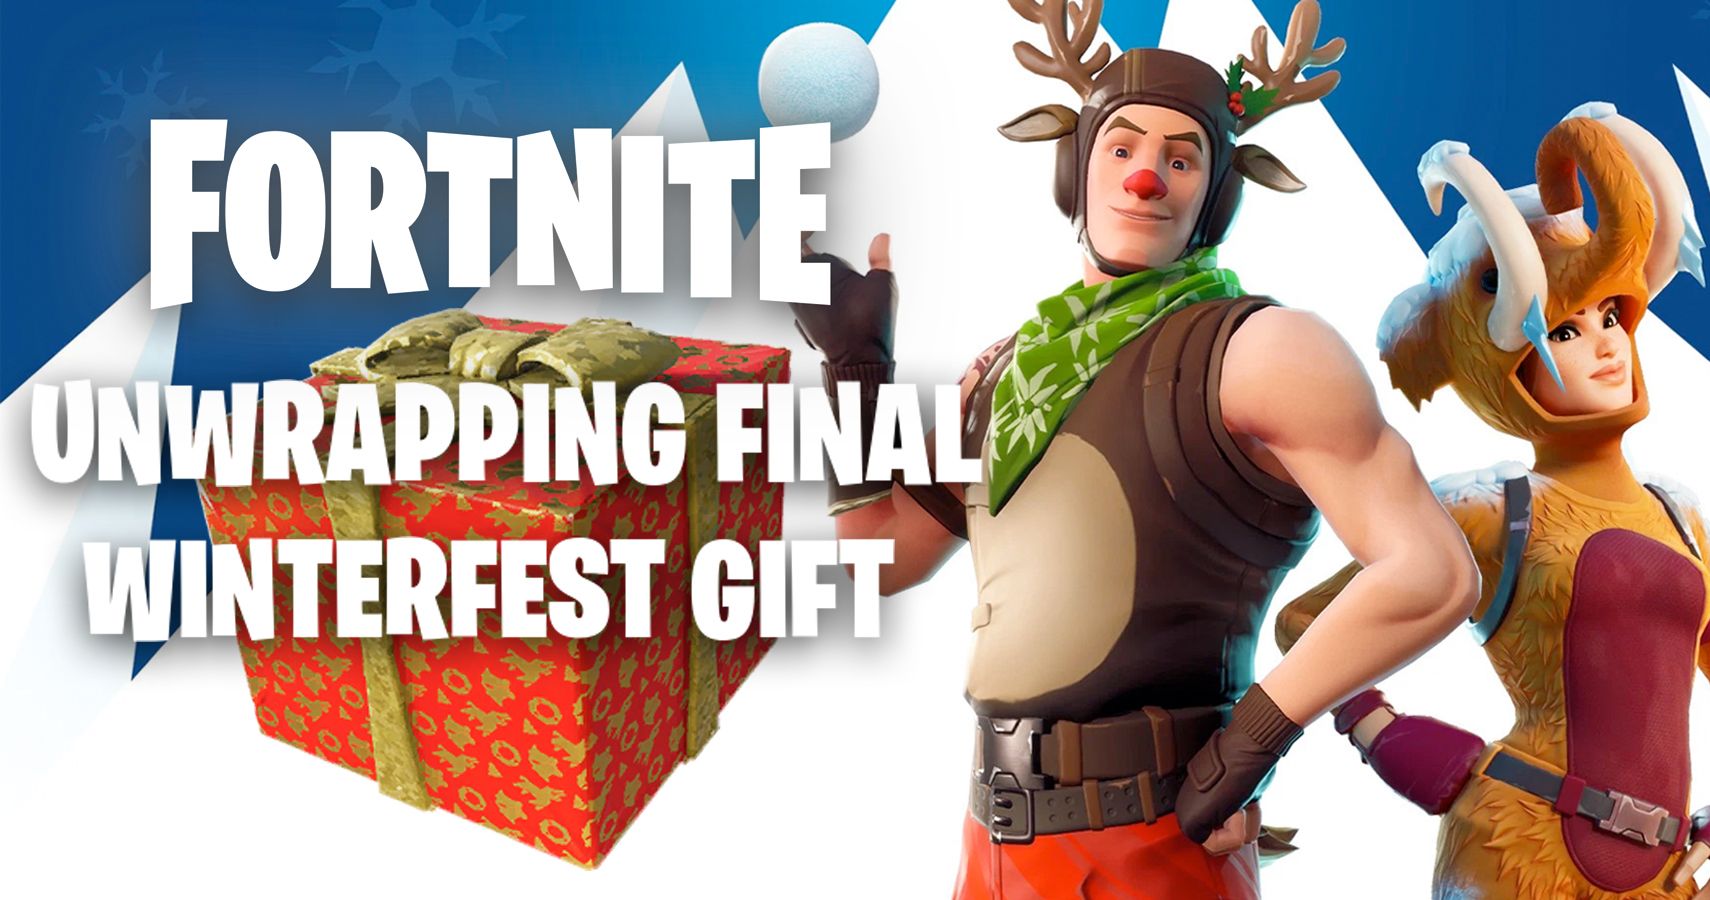 Fortnite Winterfest Kicks Off With Free Skins, Unvaulted Weapons, And More  - GameSpot